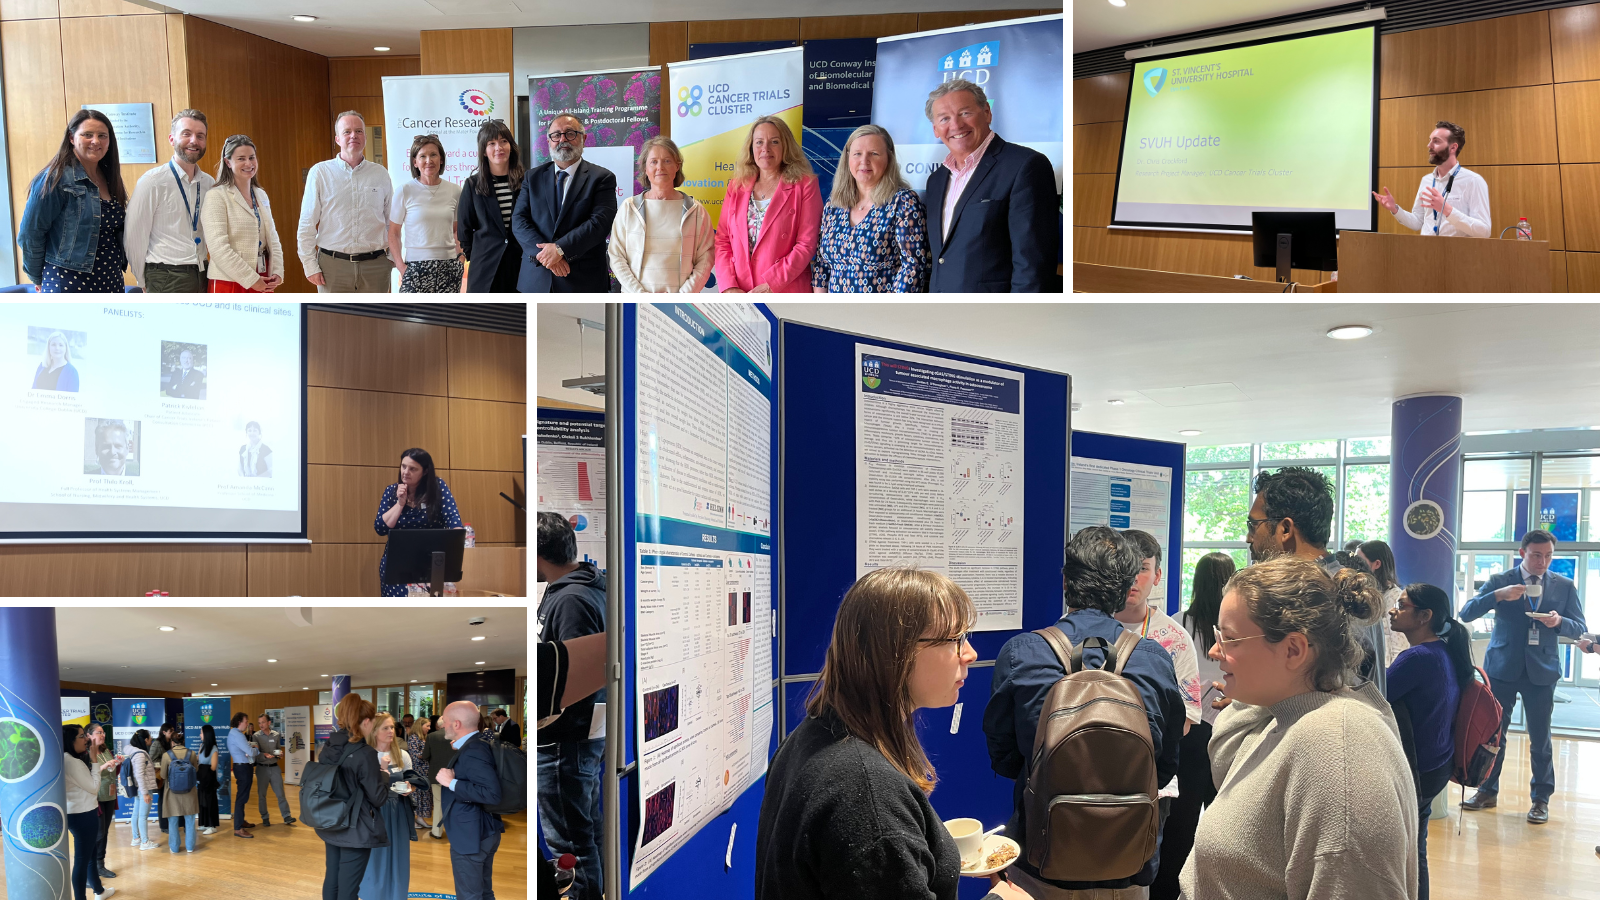 A grid of images. One image is the organising committee standing in a line against a backdrop of different department pullup banners. Two images are of speakers during their presentation. The two final images are guests mingling and networking during the break.